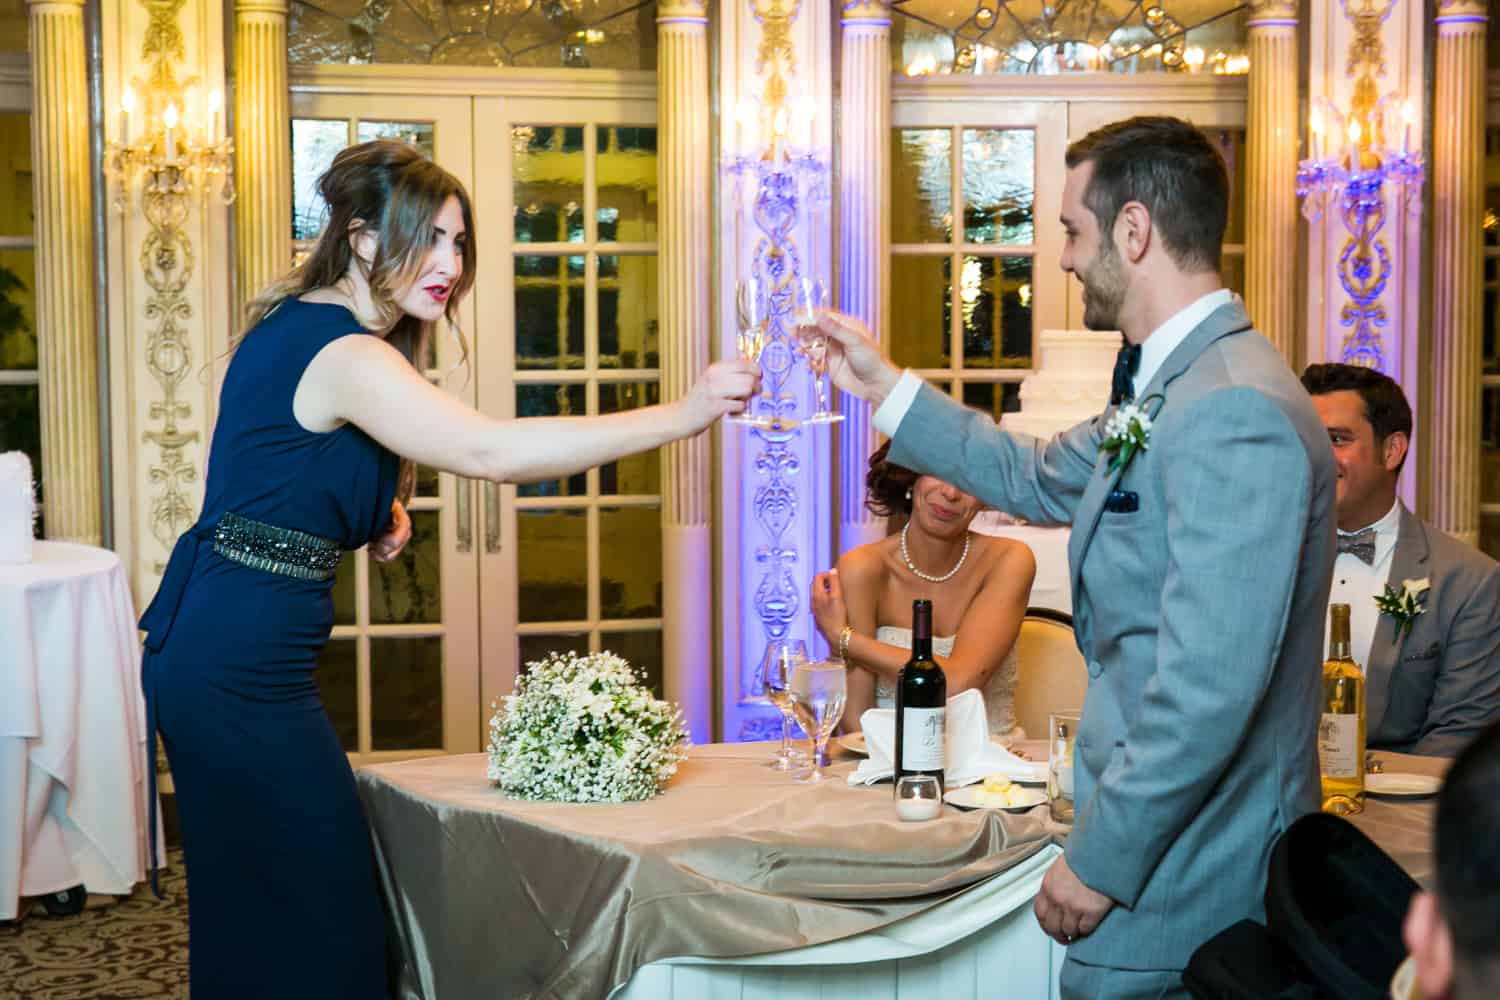 Best man and maid of honor toasting champagne glasses